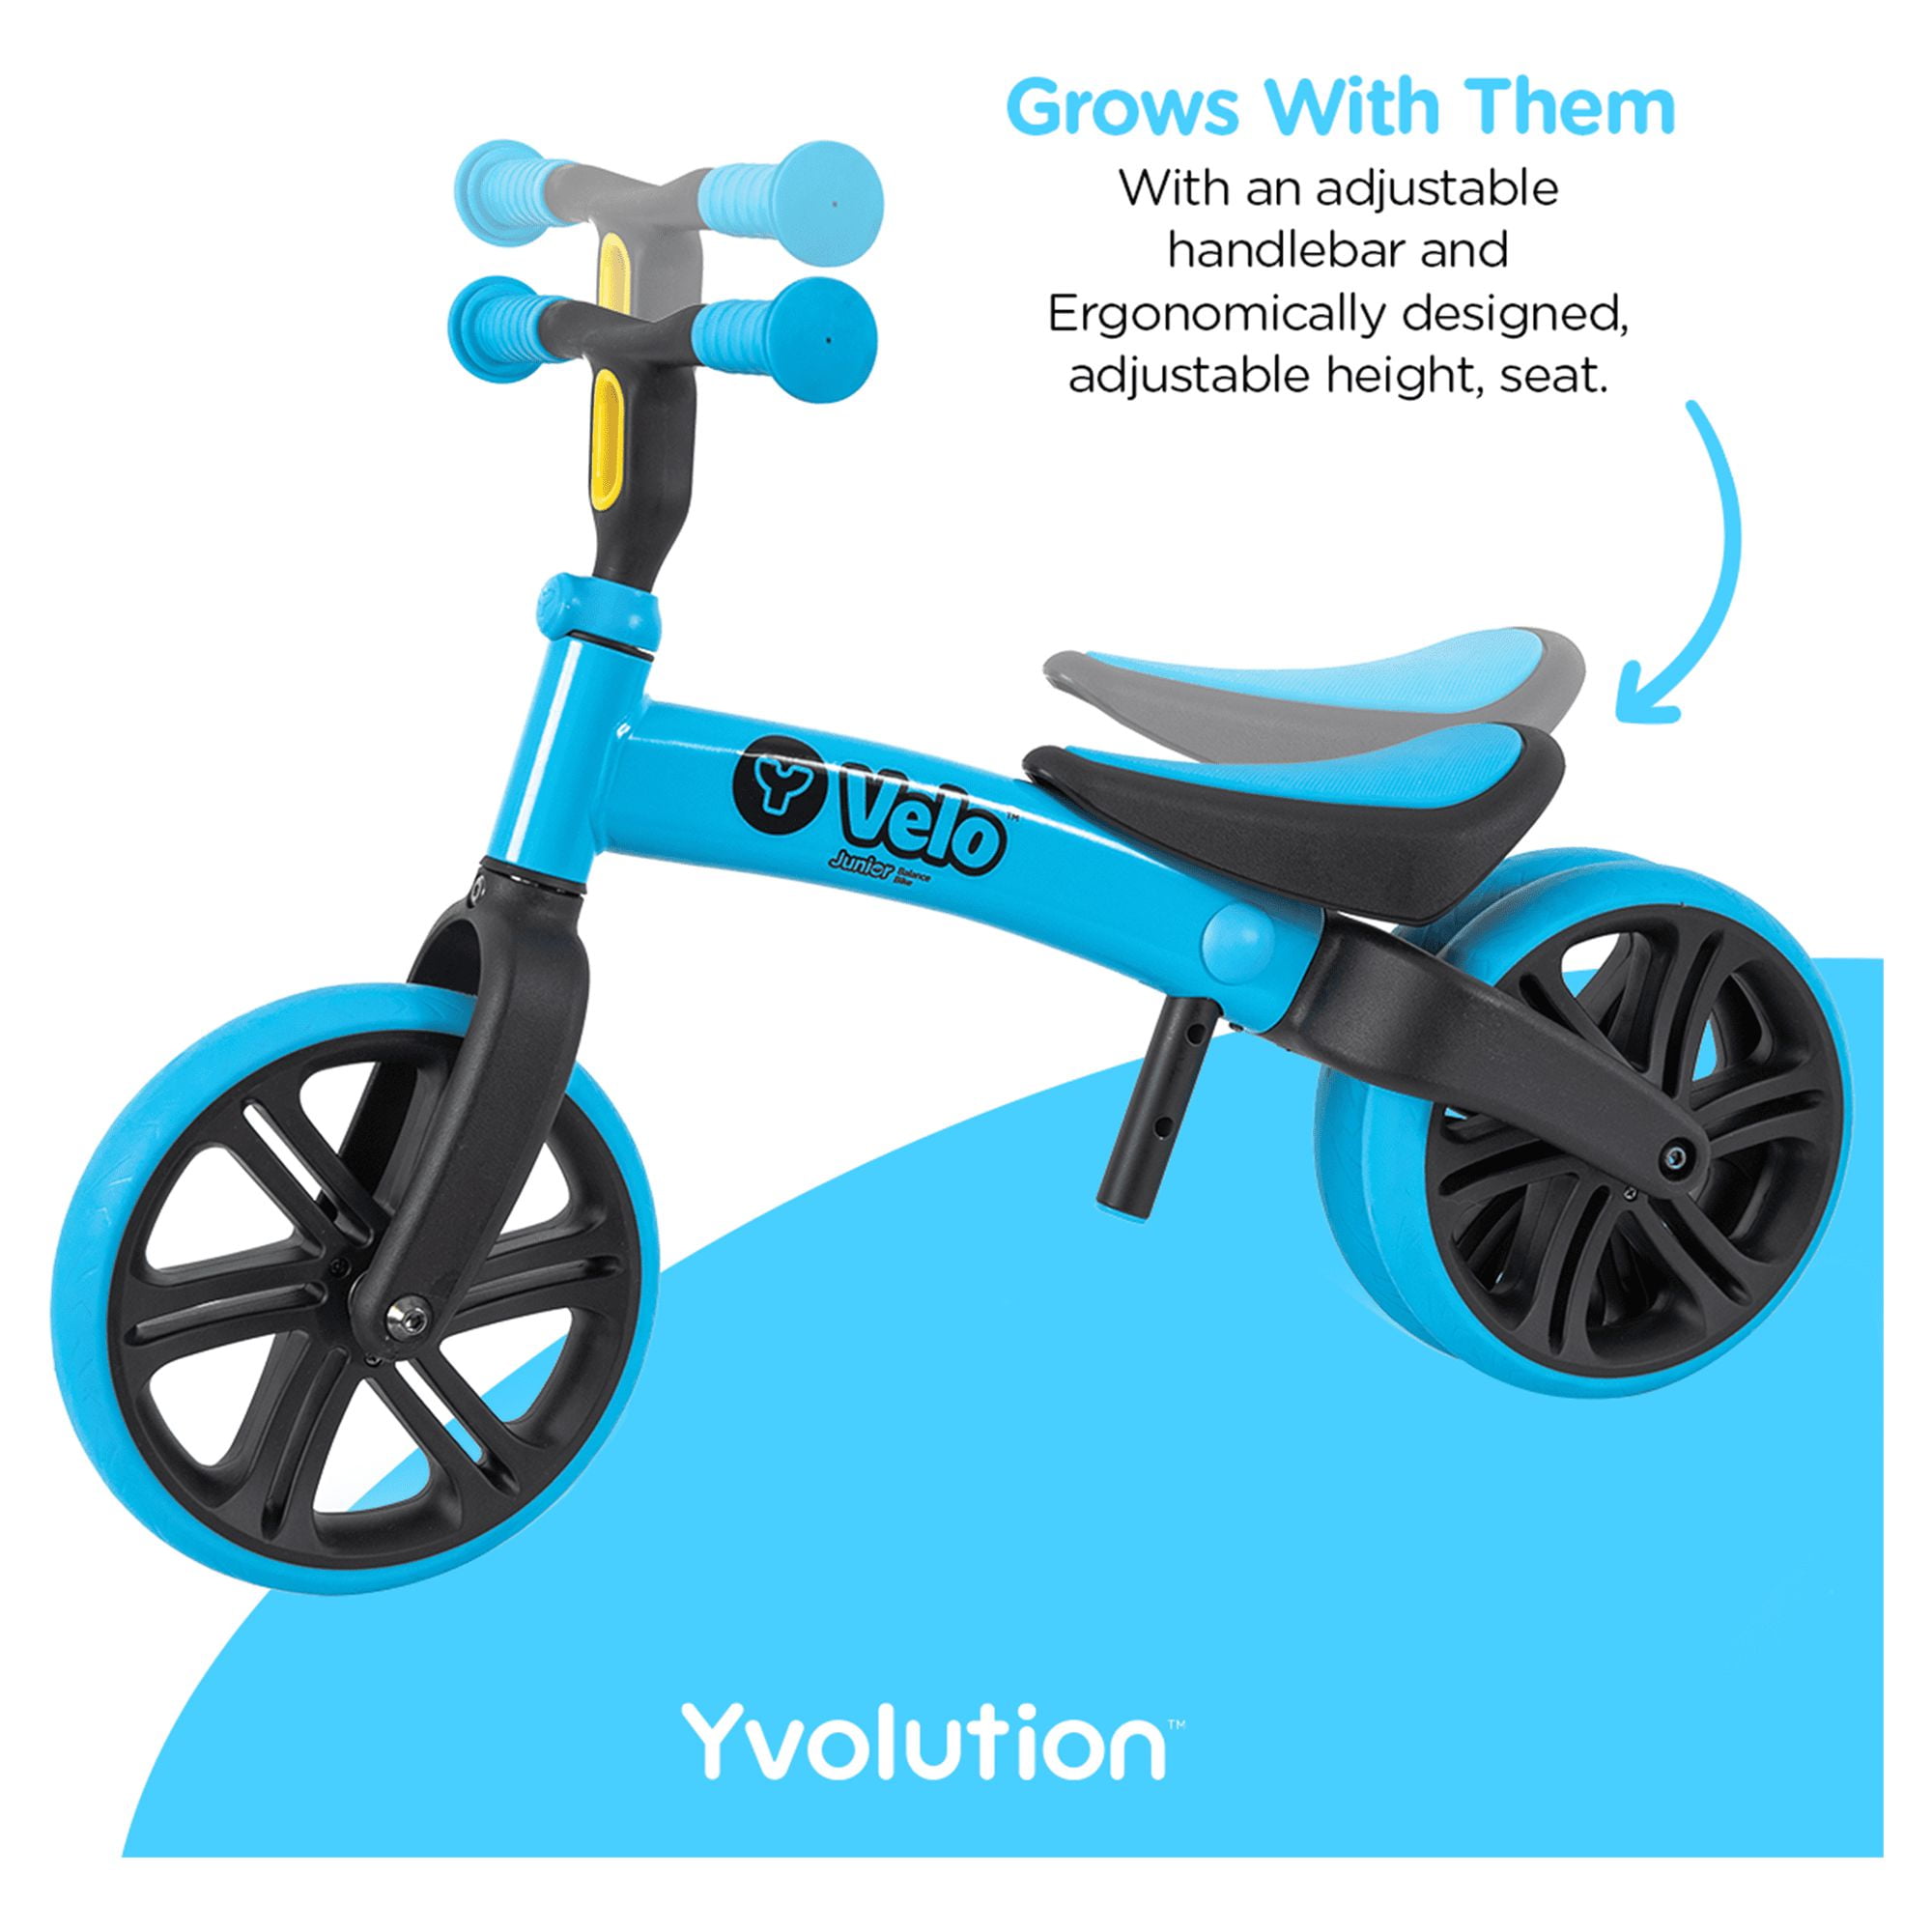 Top-Experte Yvolution Velo Toddler Boys Years Balance to Months 3 Bike Wheel (Blue) Girls, and 18 9\'\' Old